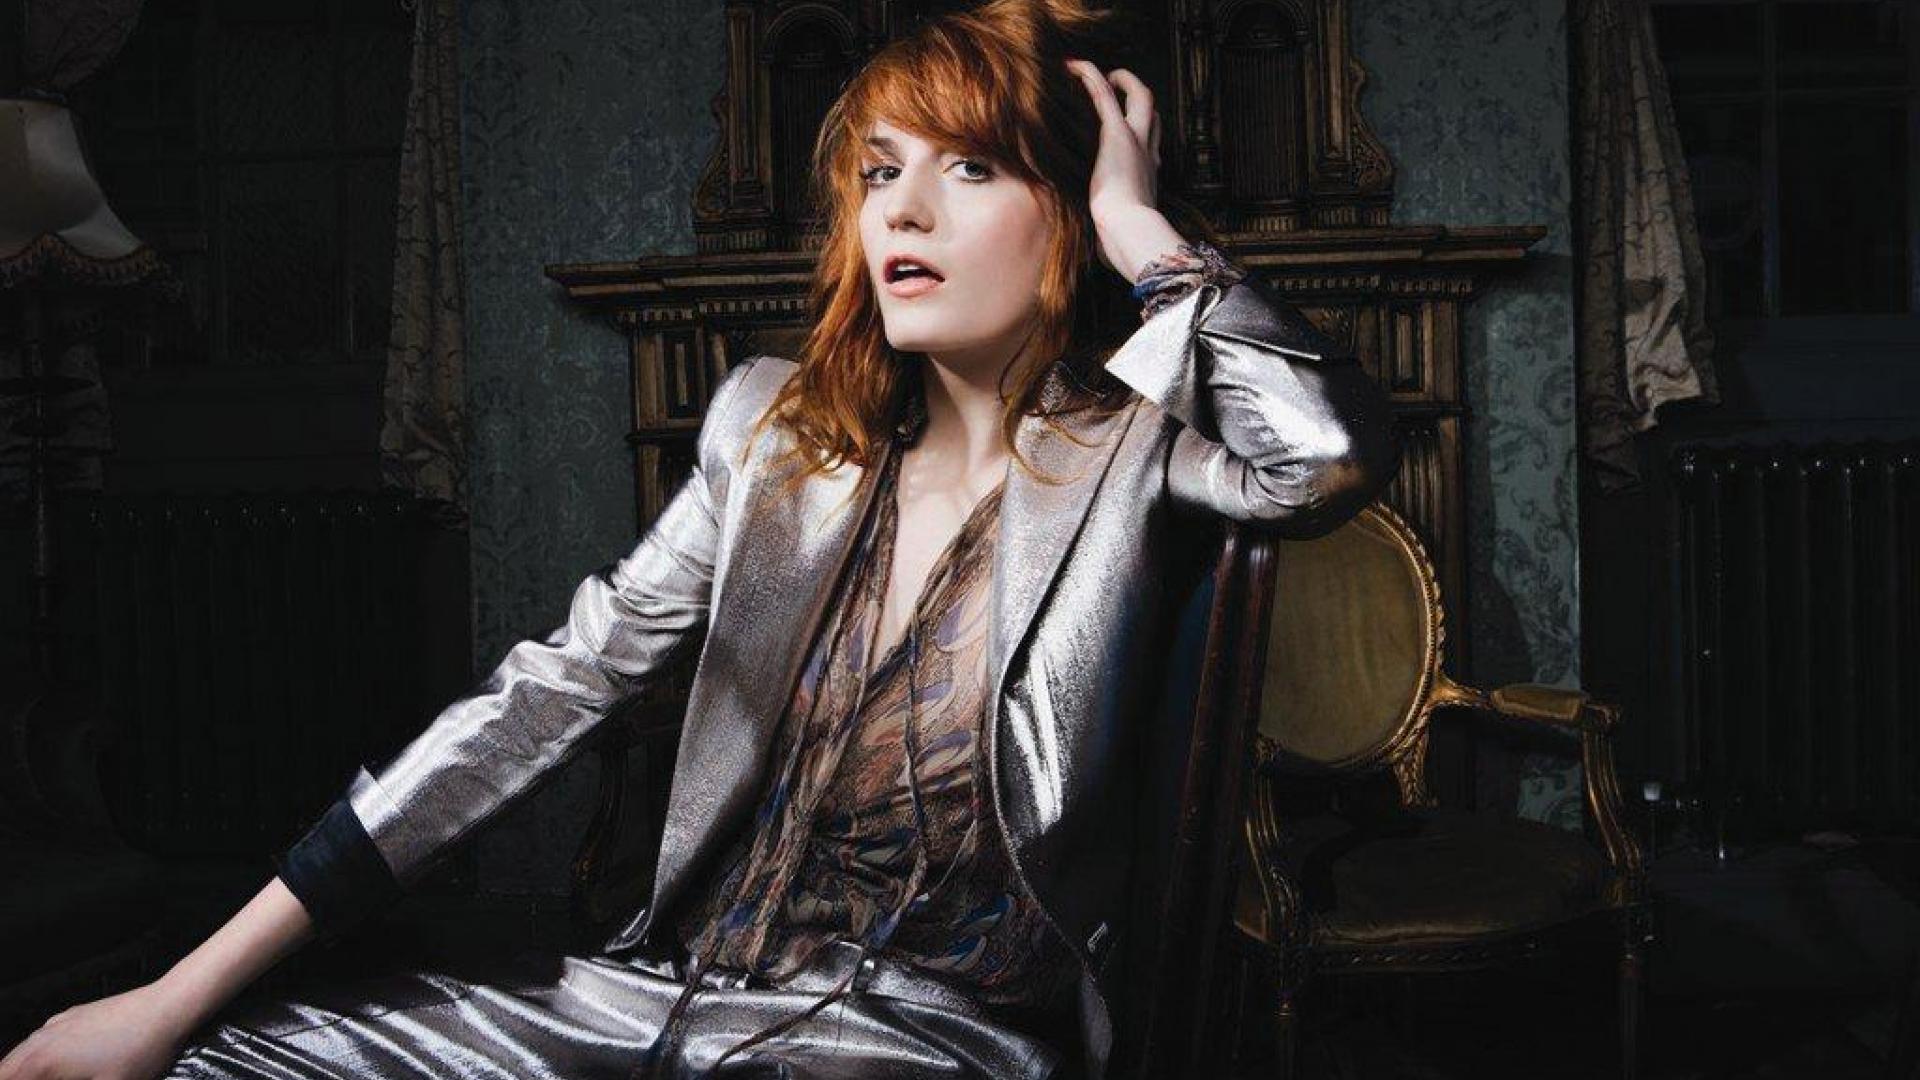 Florence And The Machine Backgrounds, Compatible - PC, Mobile, Gadgets| 1920x1080 px